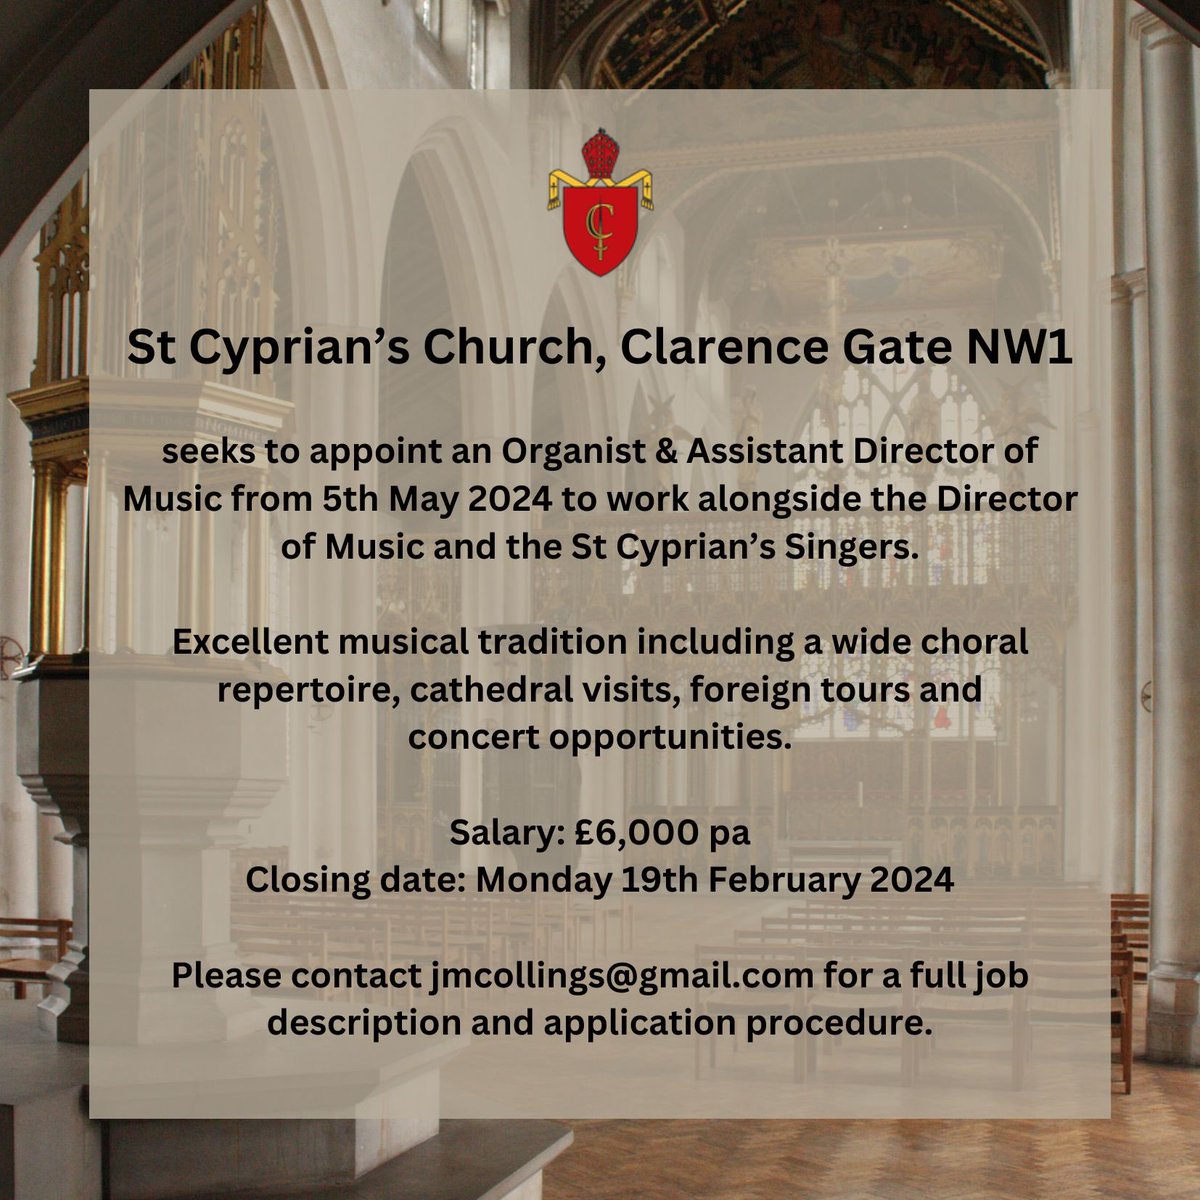 We are now recruiting for a new Organist & Assistant Director of Music @stcypriansnw1 - come and work with our renowned mixed-voiced choir in this musically active community near Regents Park and Baker Street #organists #churchmusic #choralmusic